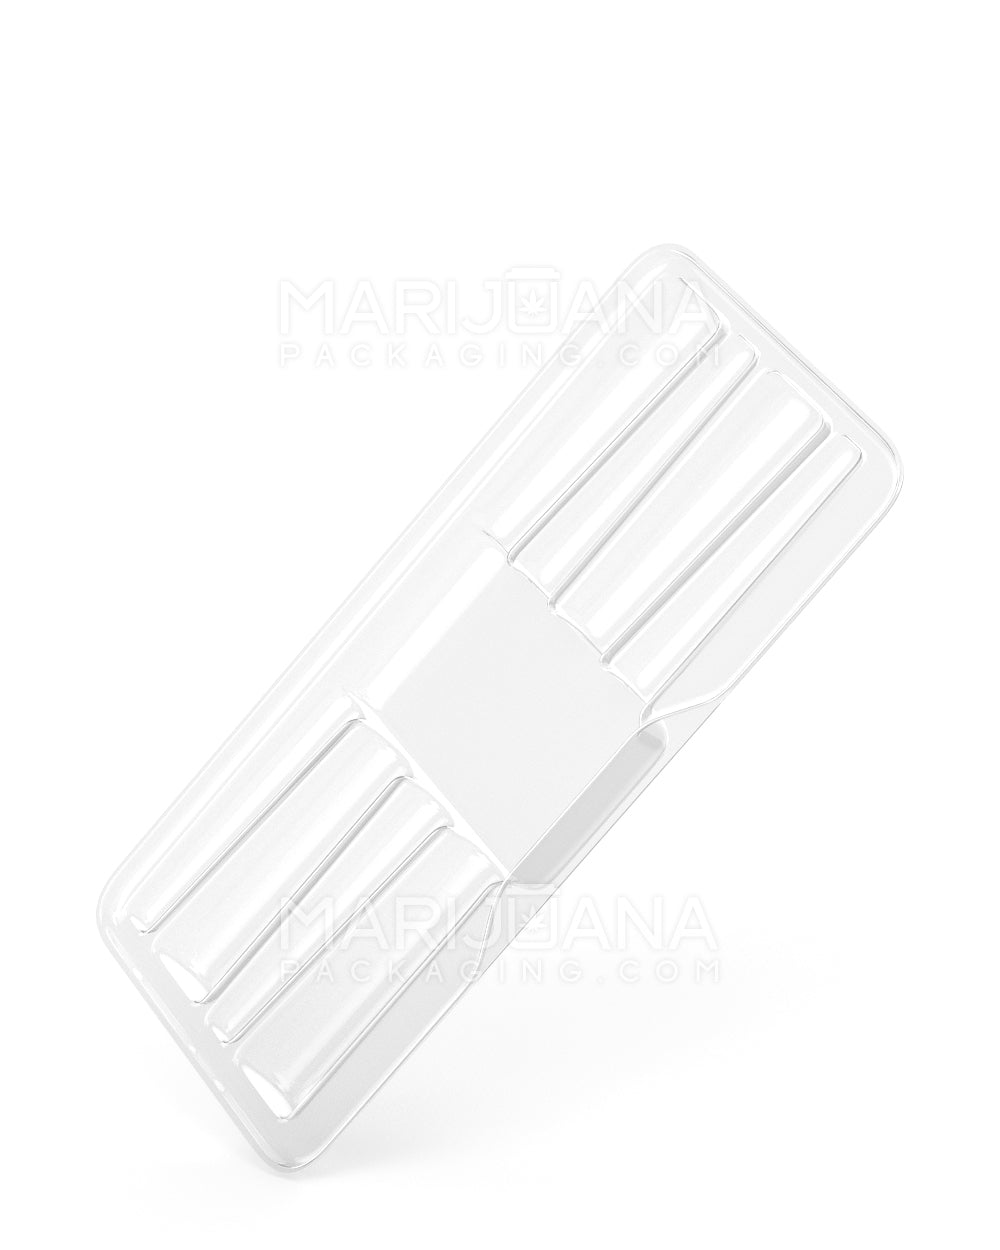 Edible & Joint Box Insert Tray for 4 King Size Pre Rolled Cones | 109mm - Clear Plastic - 100 Count - 3